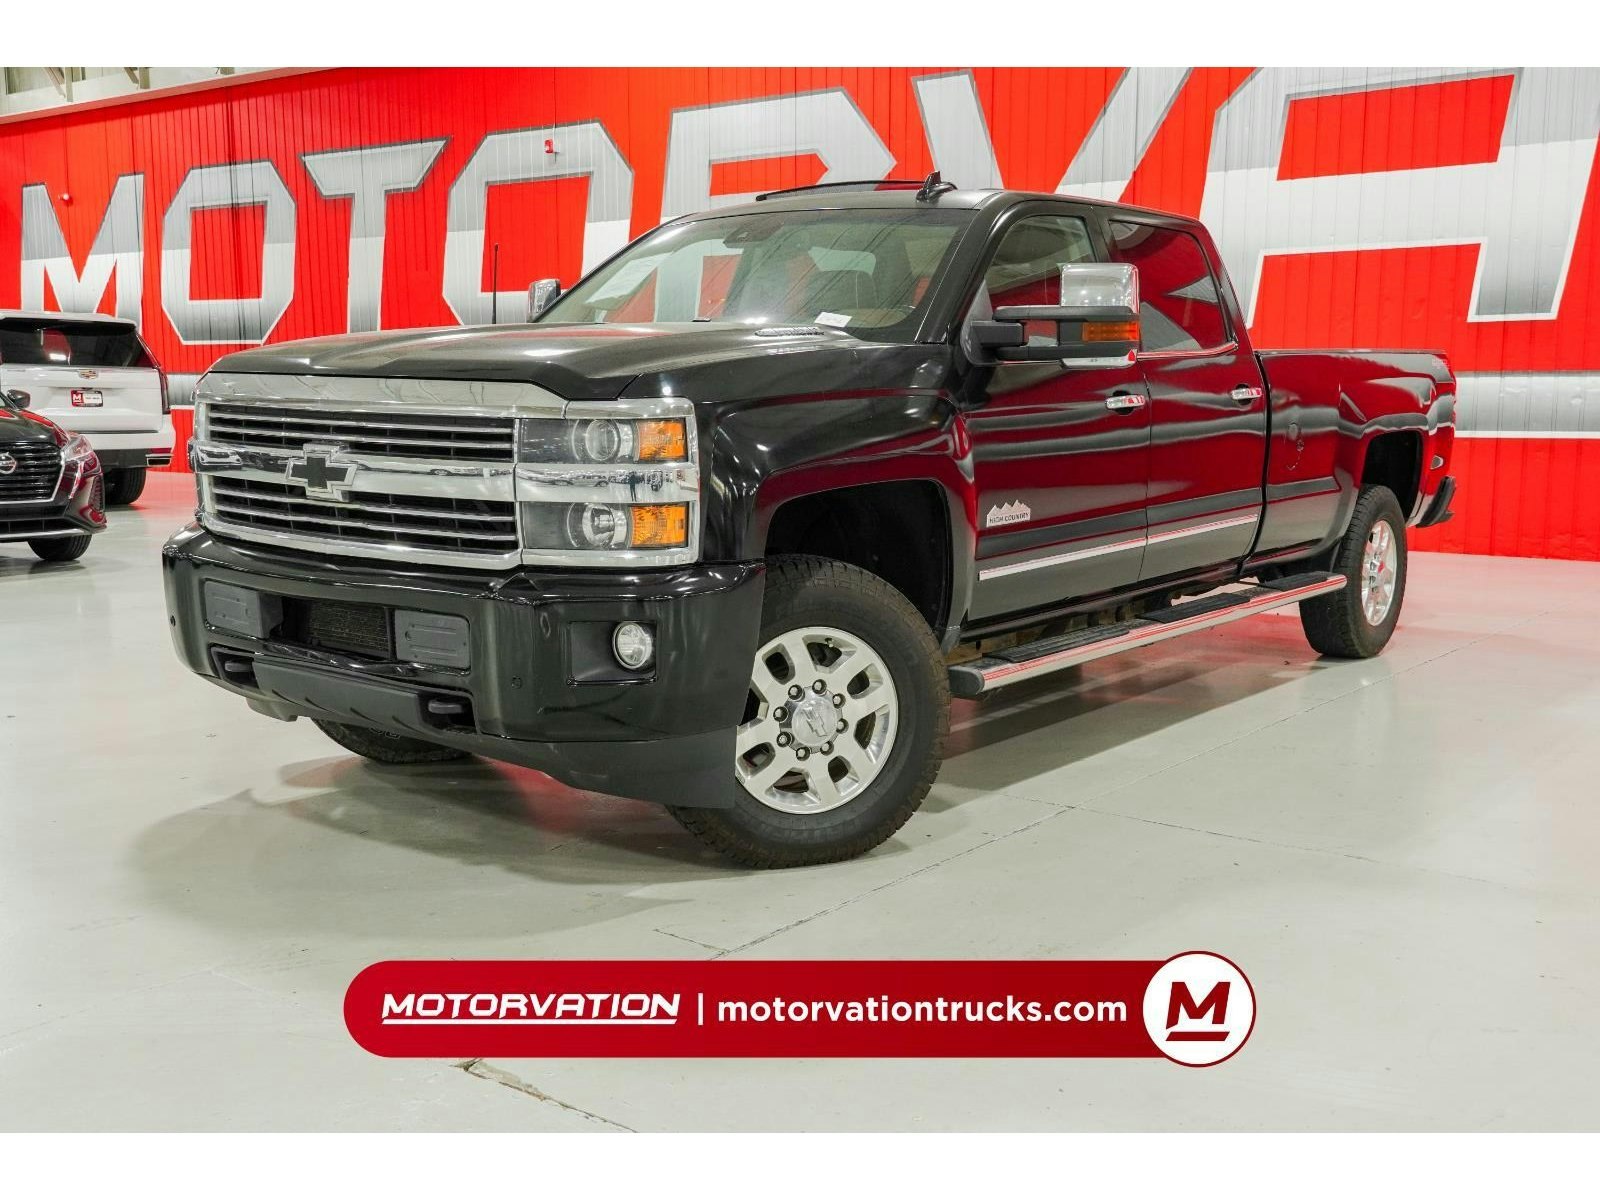 2015 Chevrolet Silverado 3500HD Built After Aug 14 High Country (6456) Main Image